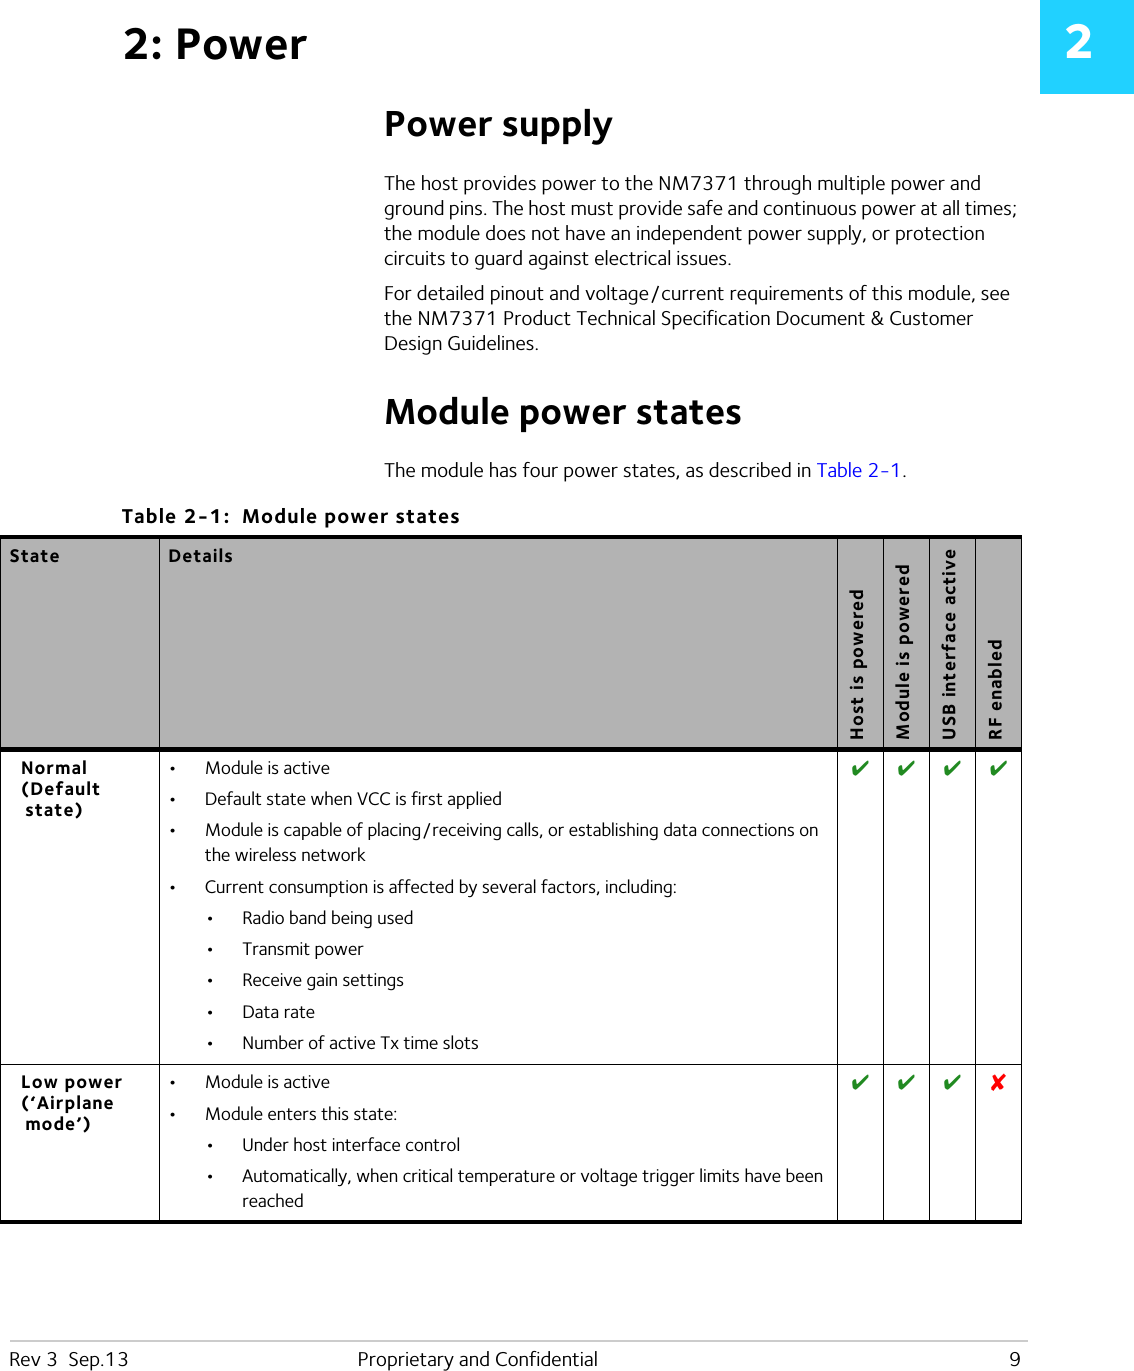 Rev 3  Sep.13 Proprietary and Confidential 922: PowerPower supplyThe host provides power to the NM7371 through multiple power and ground pins. The host must provide safe and continuous power at all times; the module does not have an independent power supply, or protection circuits to guard against electrical issues.For detailed pinout and voltage / current requirements of this module, see the NM7371 Product Technical Specification Document &amp; Customer Design Guidelines.Module power statesThe module has four power states, as described in Table 2-1. Table 2-1:  Module power states State DetailsHost is poweredModule is poweredUSB interface activeRF enabledNormal(Default state)•Module is active•Default state when VCC is first applied•Module is capable of placing / receiving calls, or establishing data connections on the wireless network•Current consumption is affected by several factors, including:•Radio band being used•Transmit power•Receive gain settings•Data rate•Number of active Tx time slots   Low power(‘Airplane mode’)•Module is active•Module enters this state:•Under host interface control•Automatically, when critical temperature or voltage trigger limits have been reached   